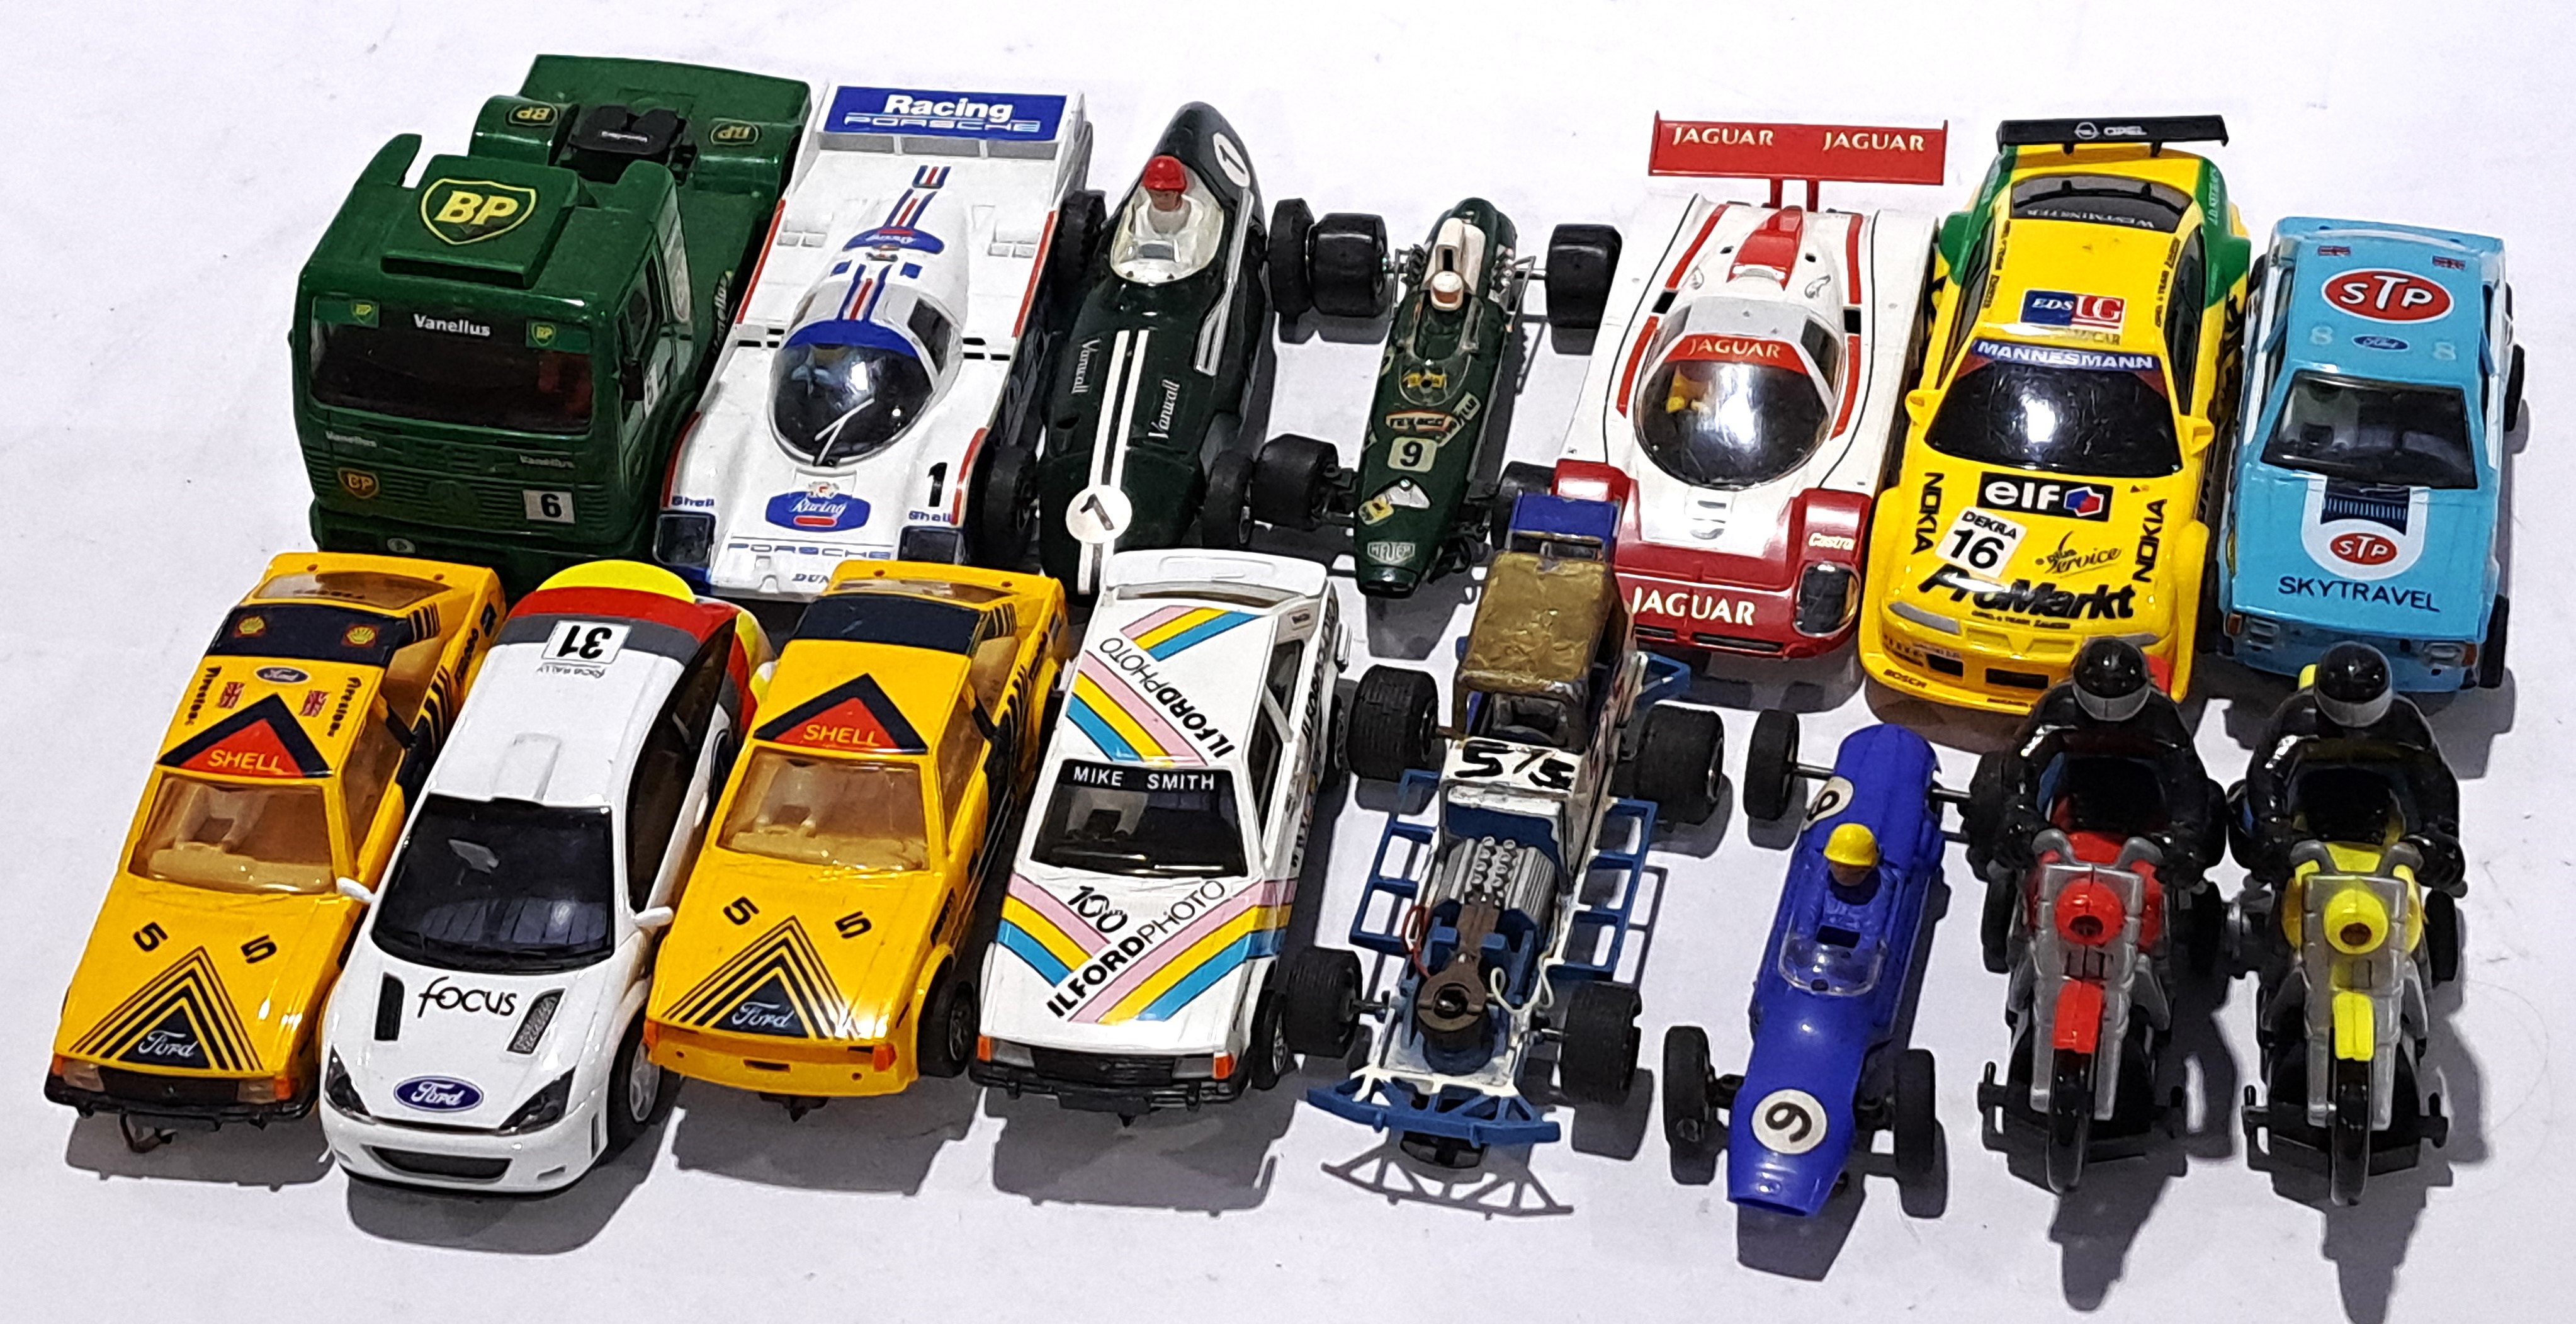 Scalextric and similar, a mixed unboxed group of Slot cars. Not checked for completeness or corre...